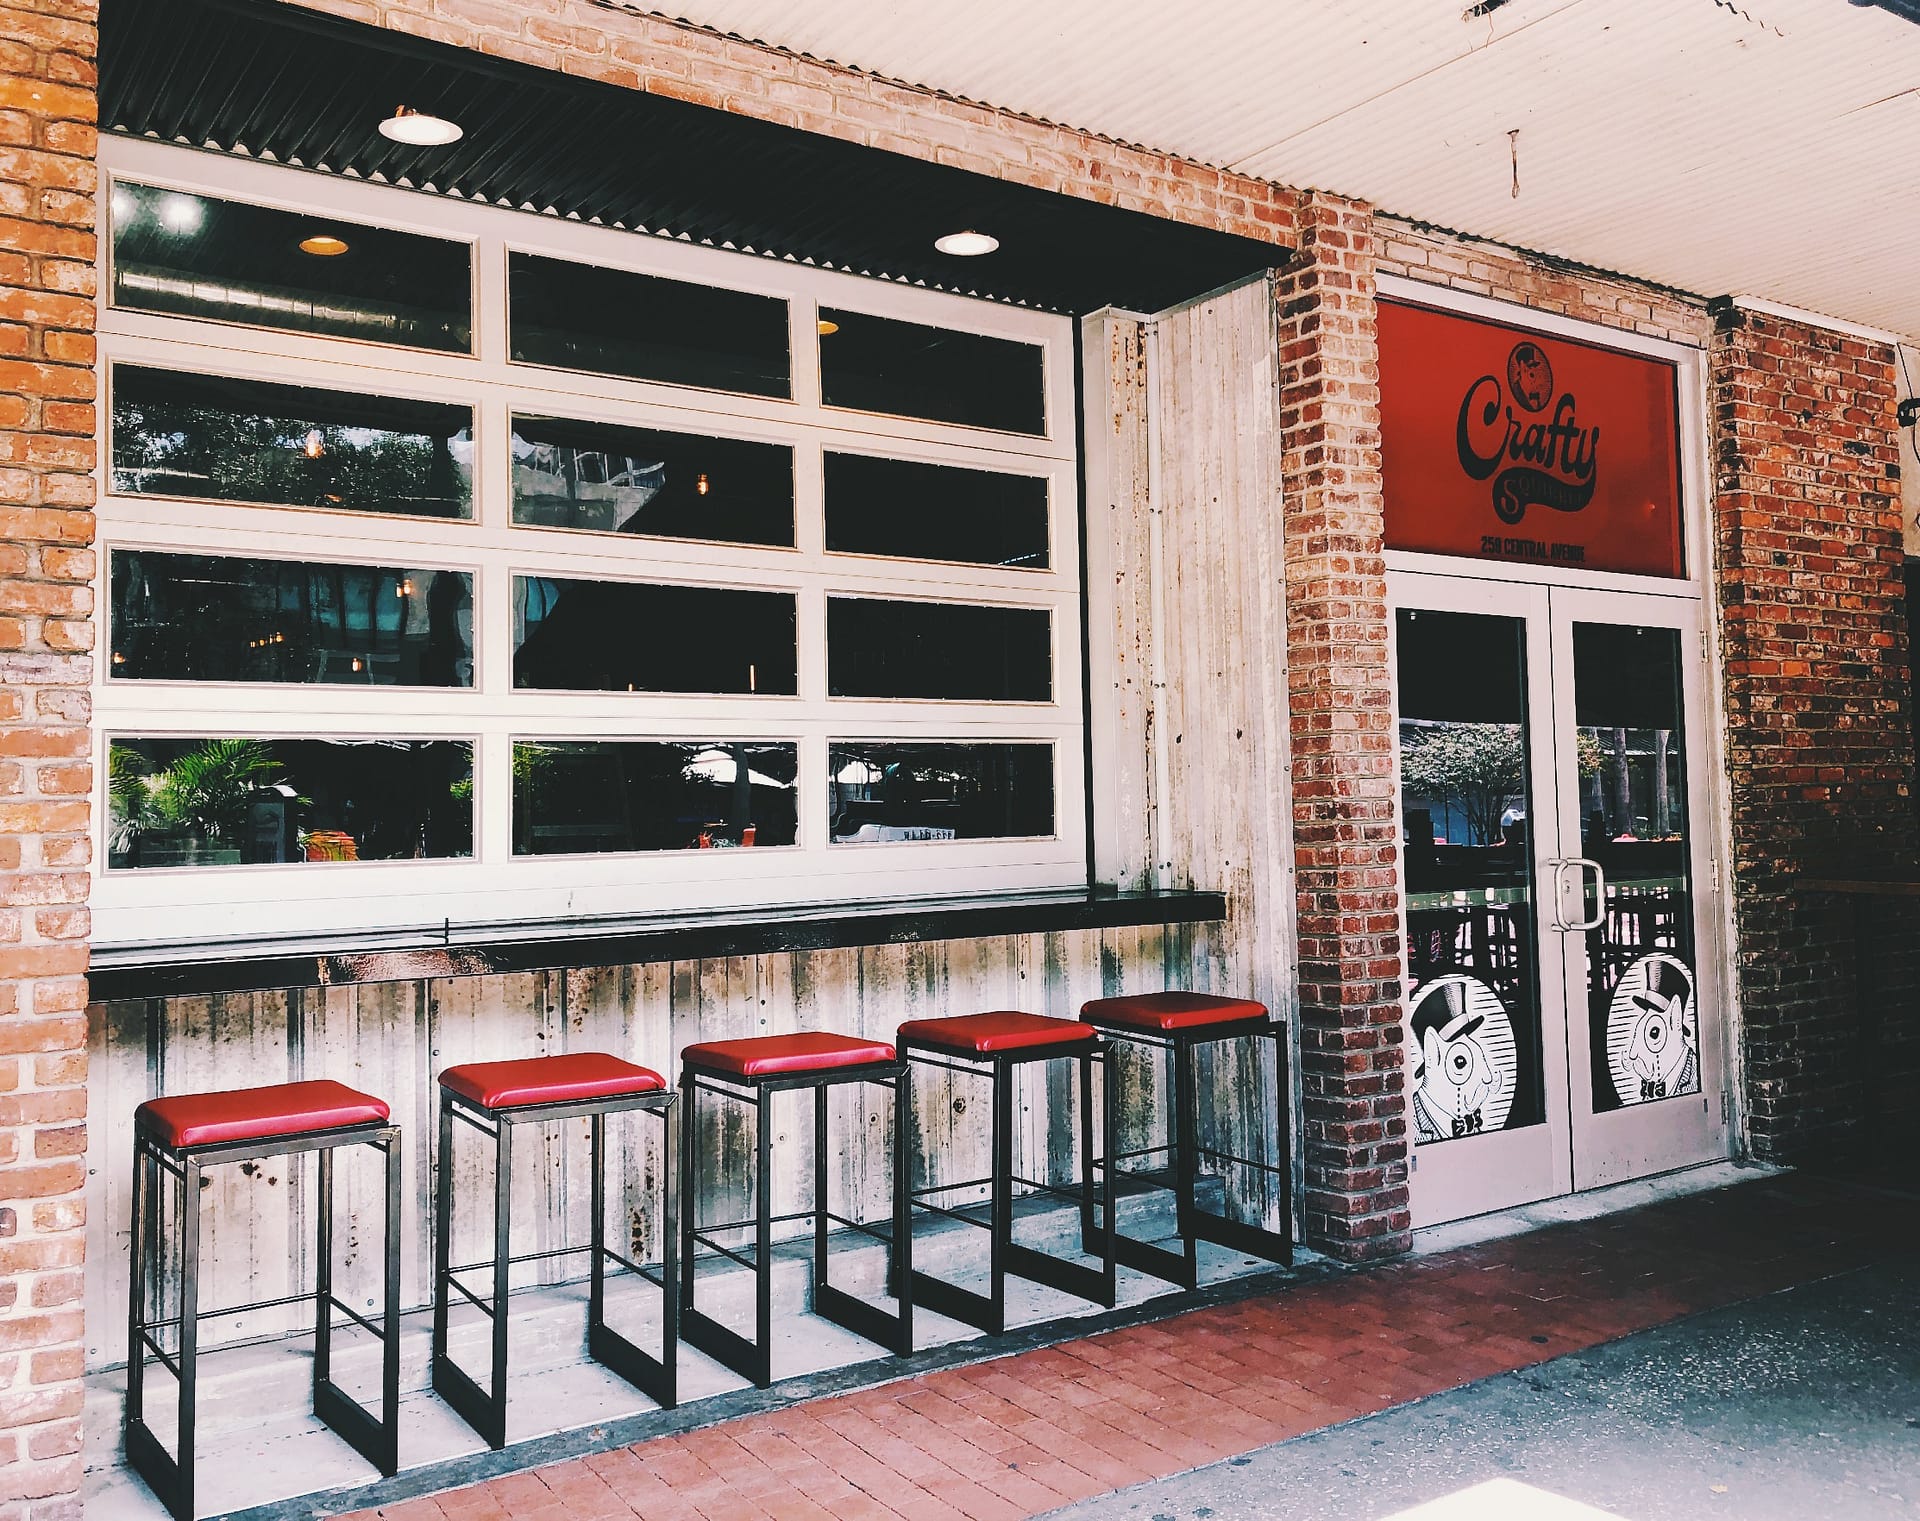 The outside bar, complete with red stools and garage doors at Crafty Squirrel in Downtown, St. Petersburg, FL